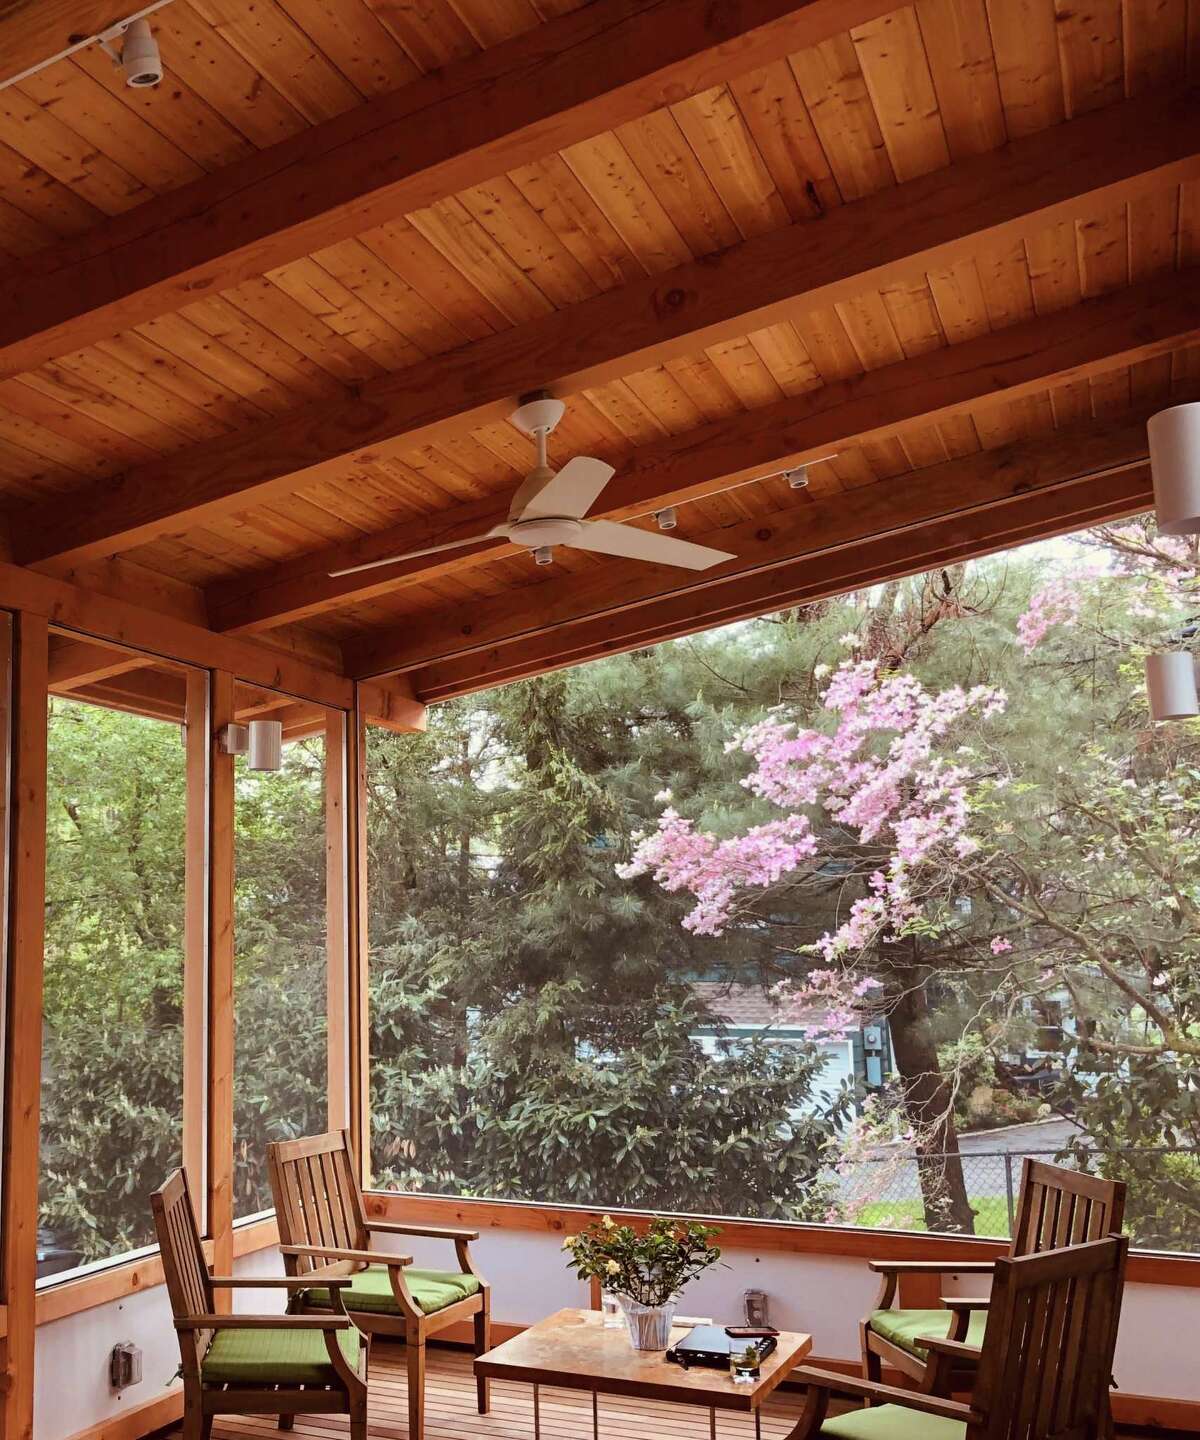 The old-fashioned screen porch is today's answer to the climate-change dilemma.